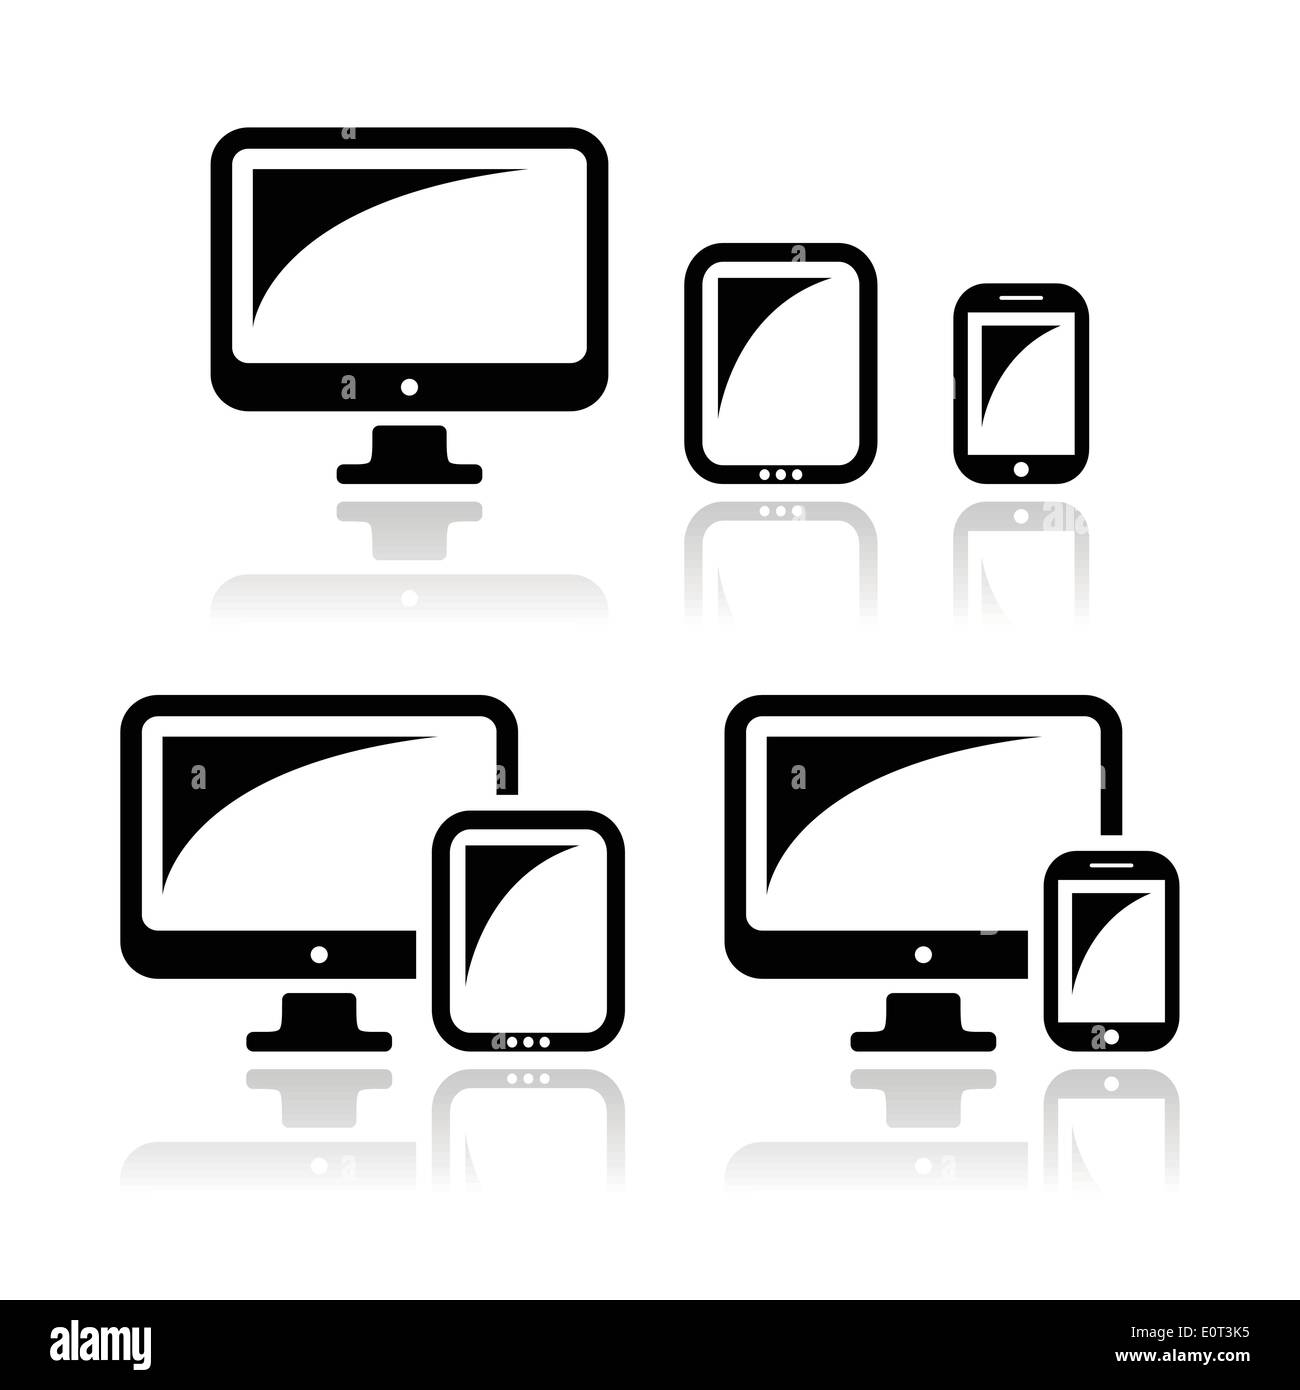 Computer, tablet, smartphone vector icons set Stock Vector